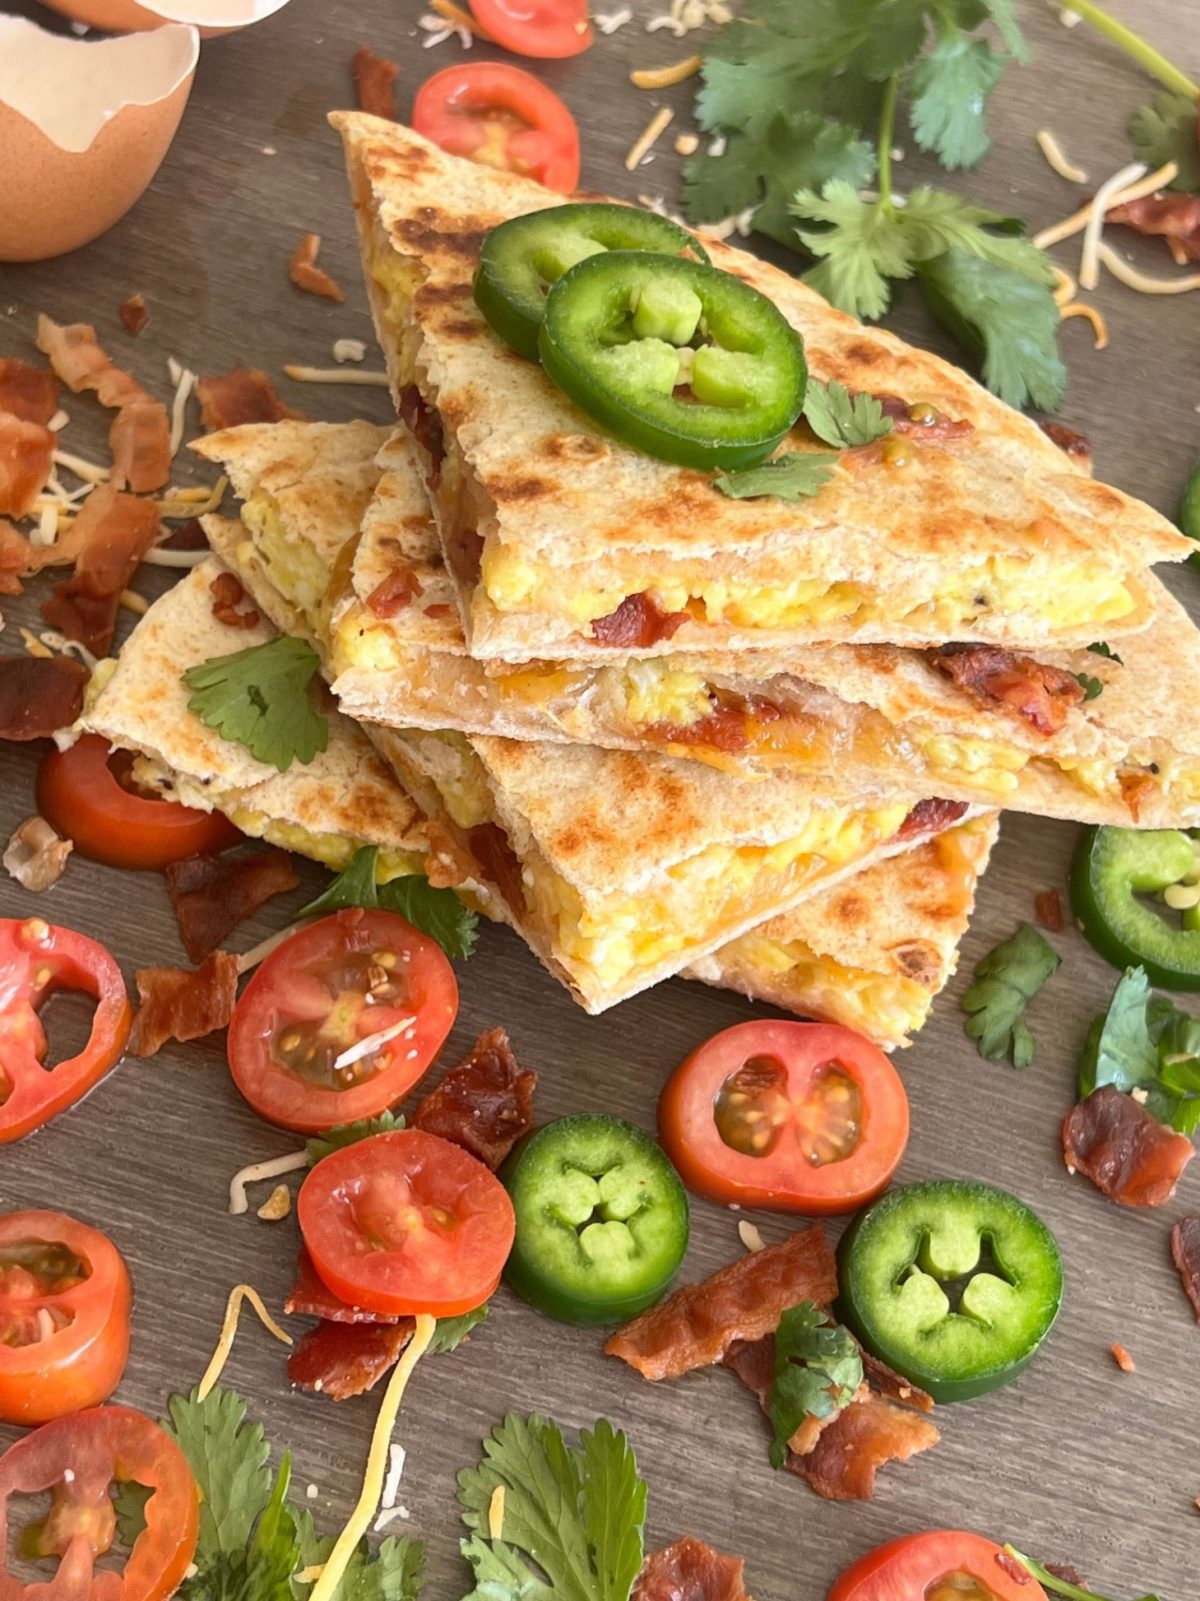 https://thepounddropper.com/wp-content/uploads/2022/04/Feature-Image-for-breakfast-quesadillas-.jpg